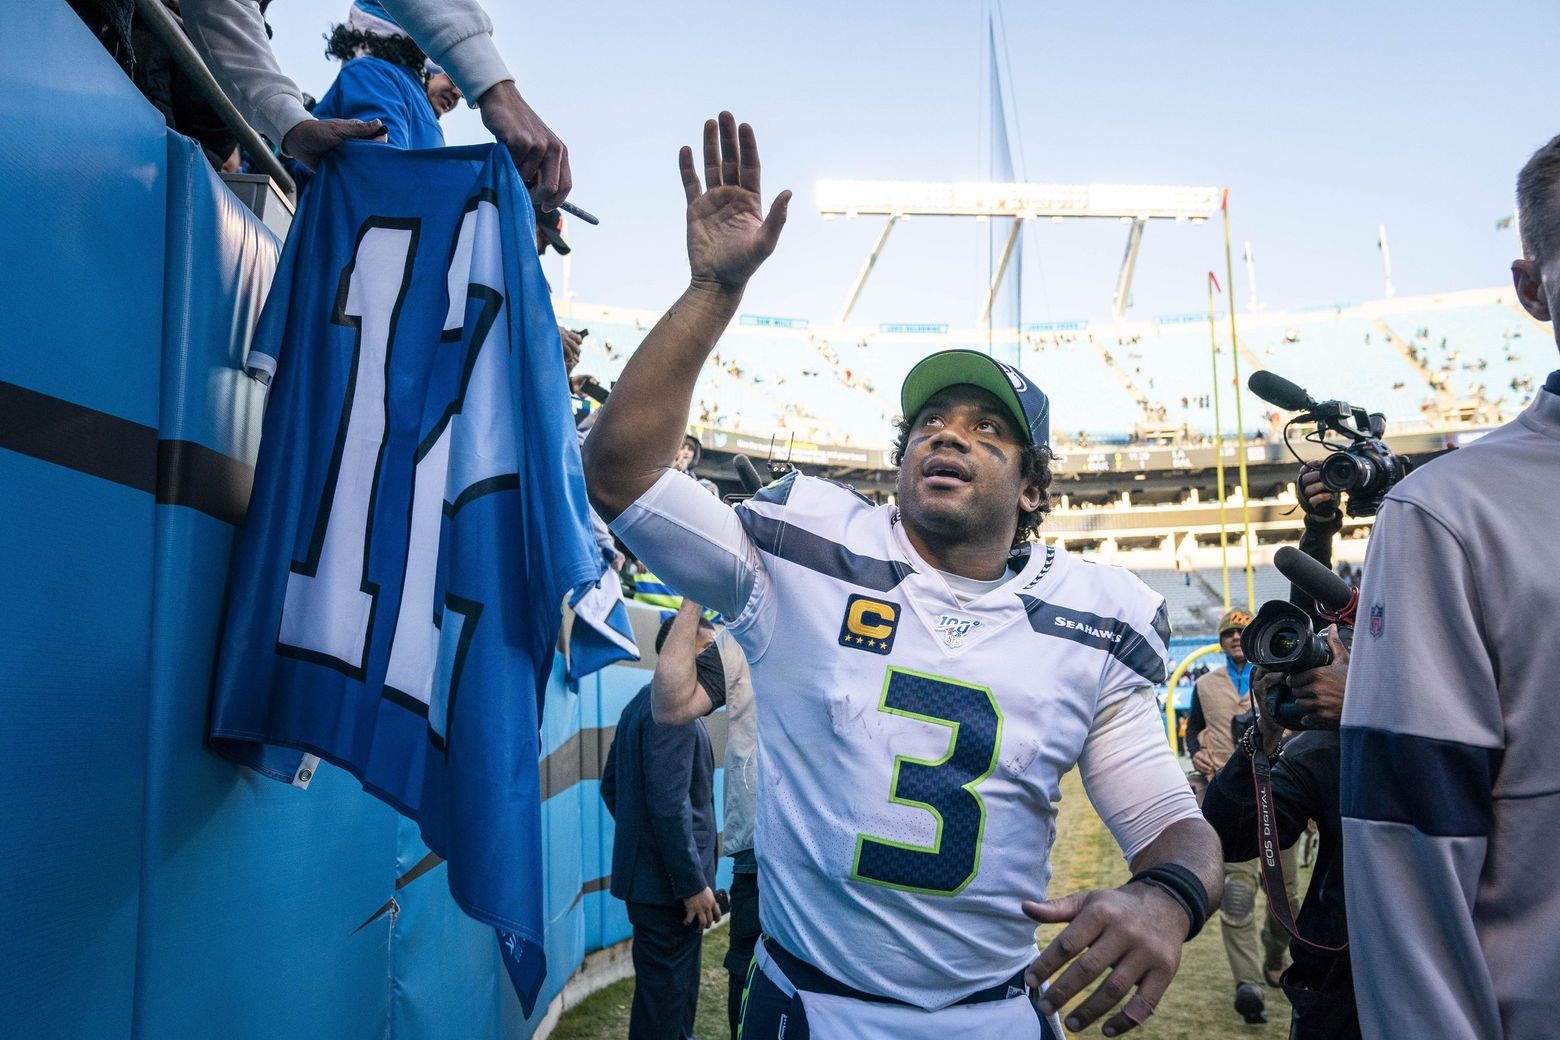 It wasn't easy, but the Seahawks win, clinch playoff berth and reclaim  their first-place spot in NFC West